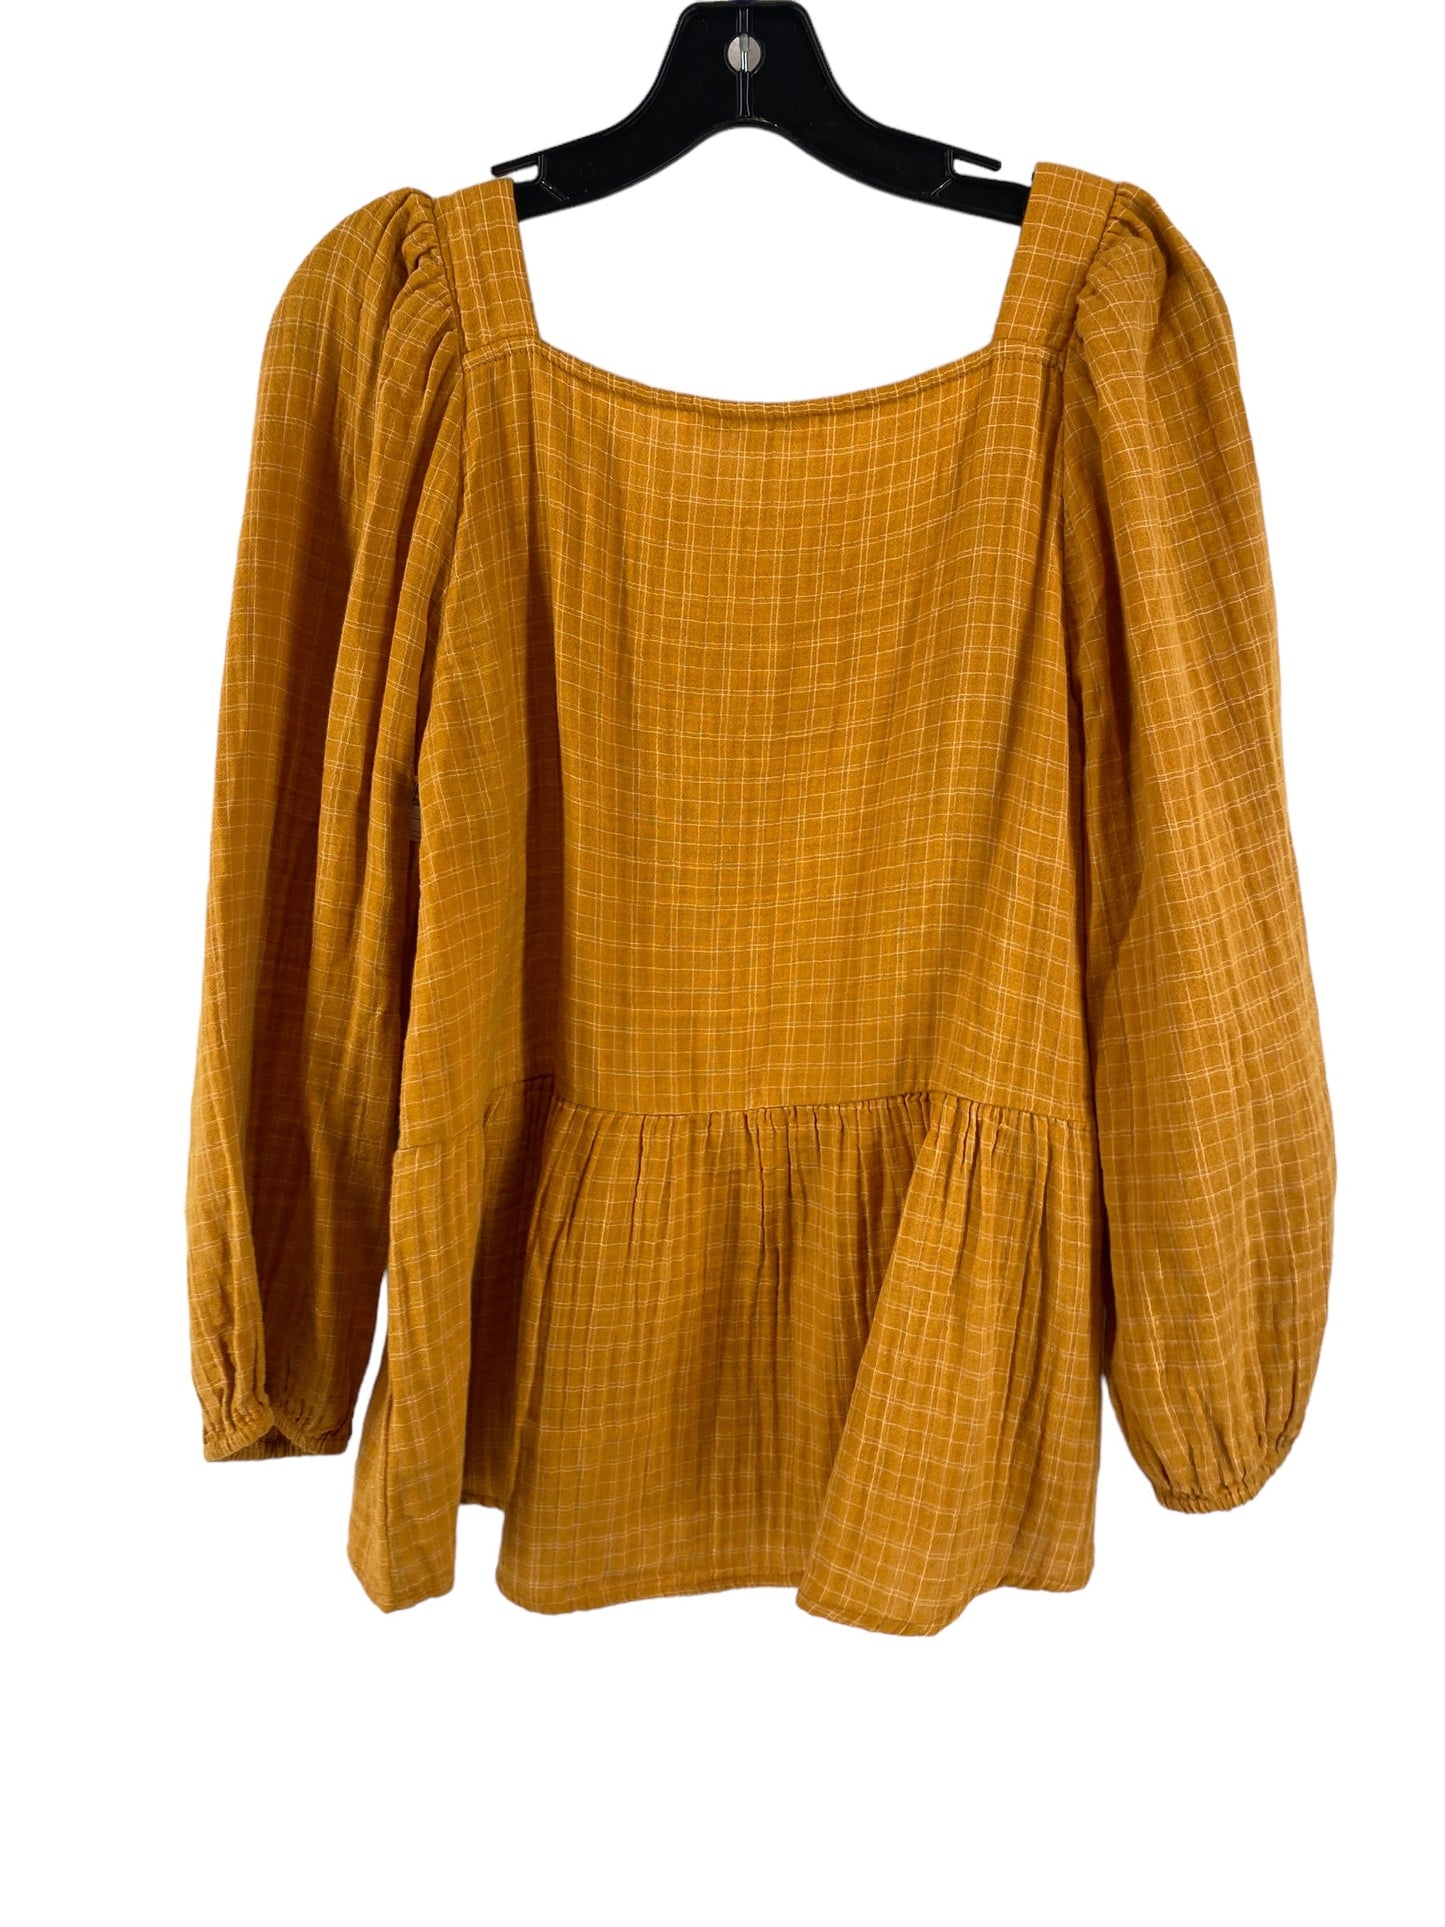 Yellow Top Long Sleeve Madewell, Size M